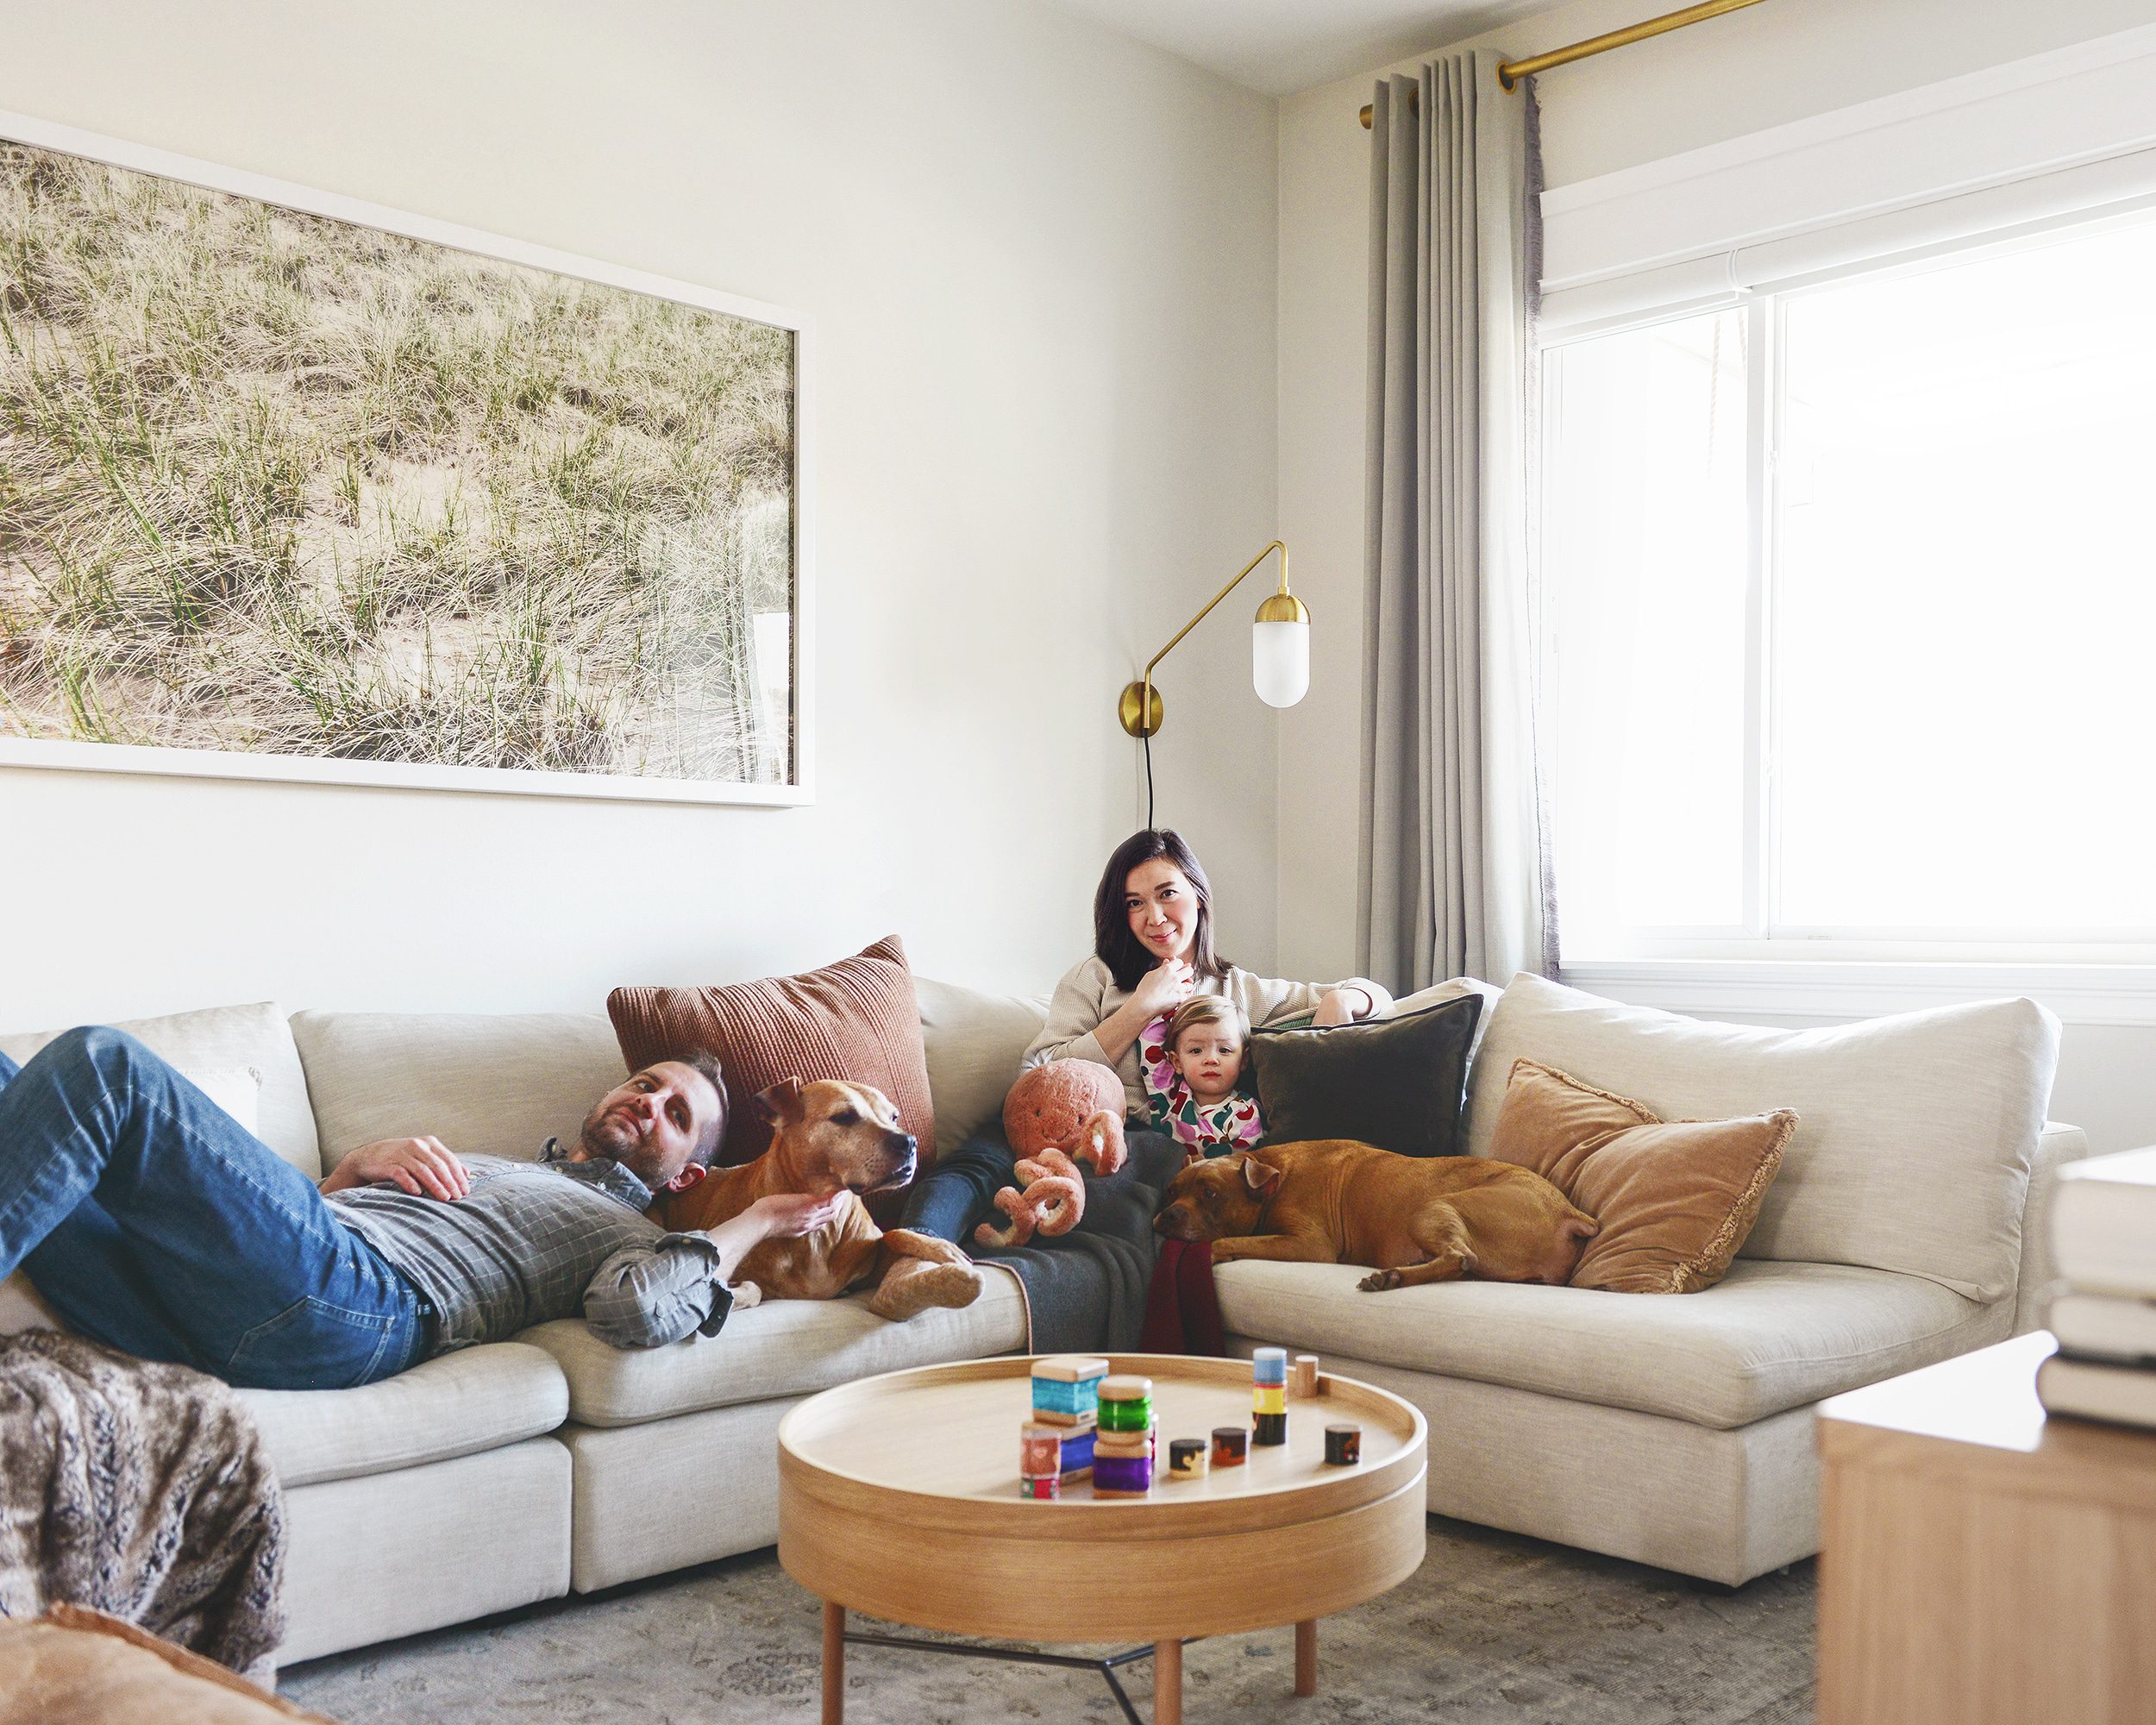 Our family + two Pit Bulls hanging out in our living room on the corner sectional | Our goals for 2020, the best is yet to come! via Yellow Brick Home